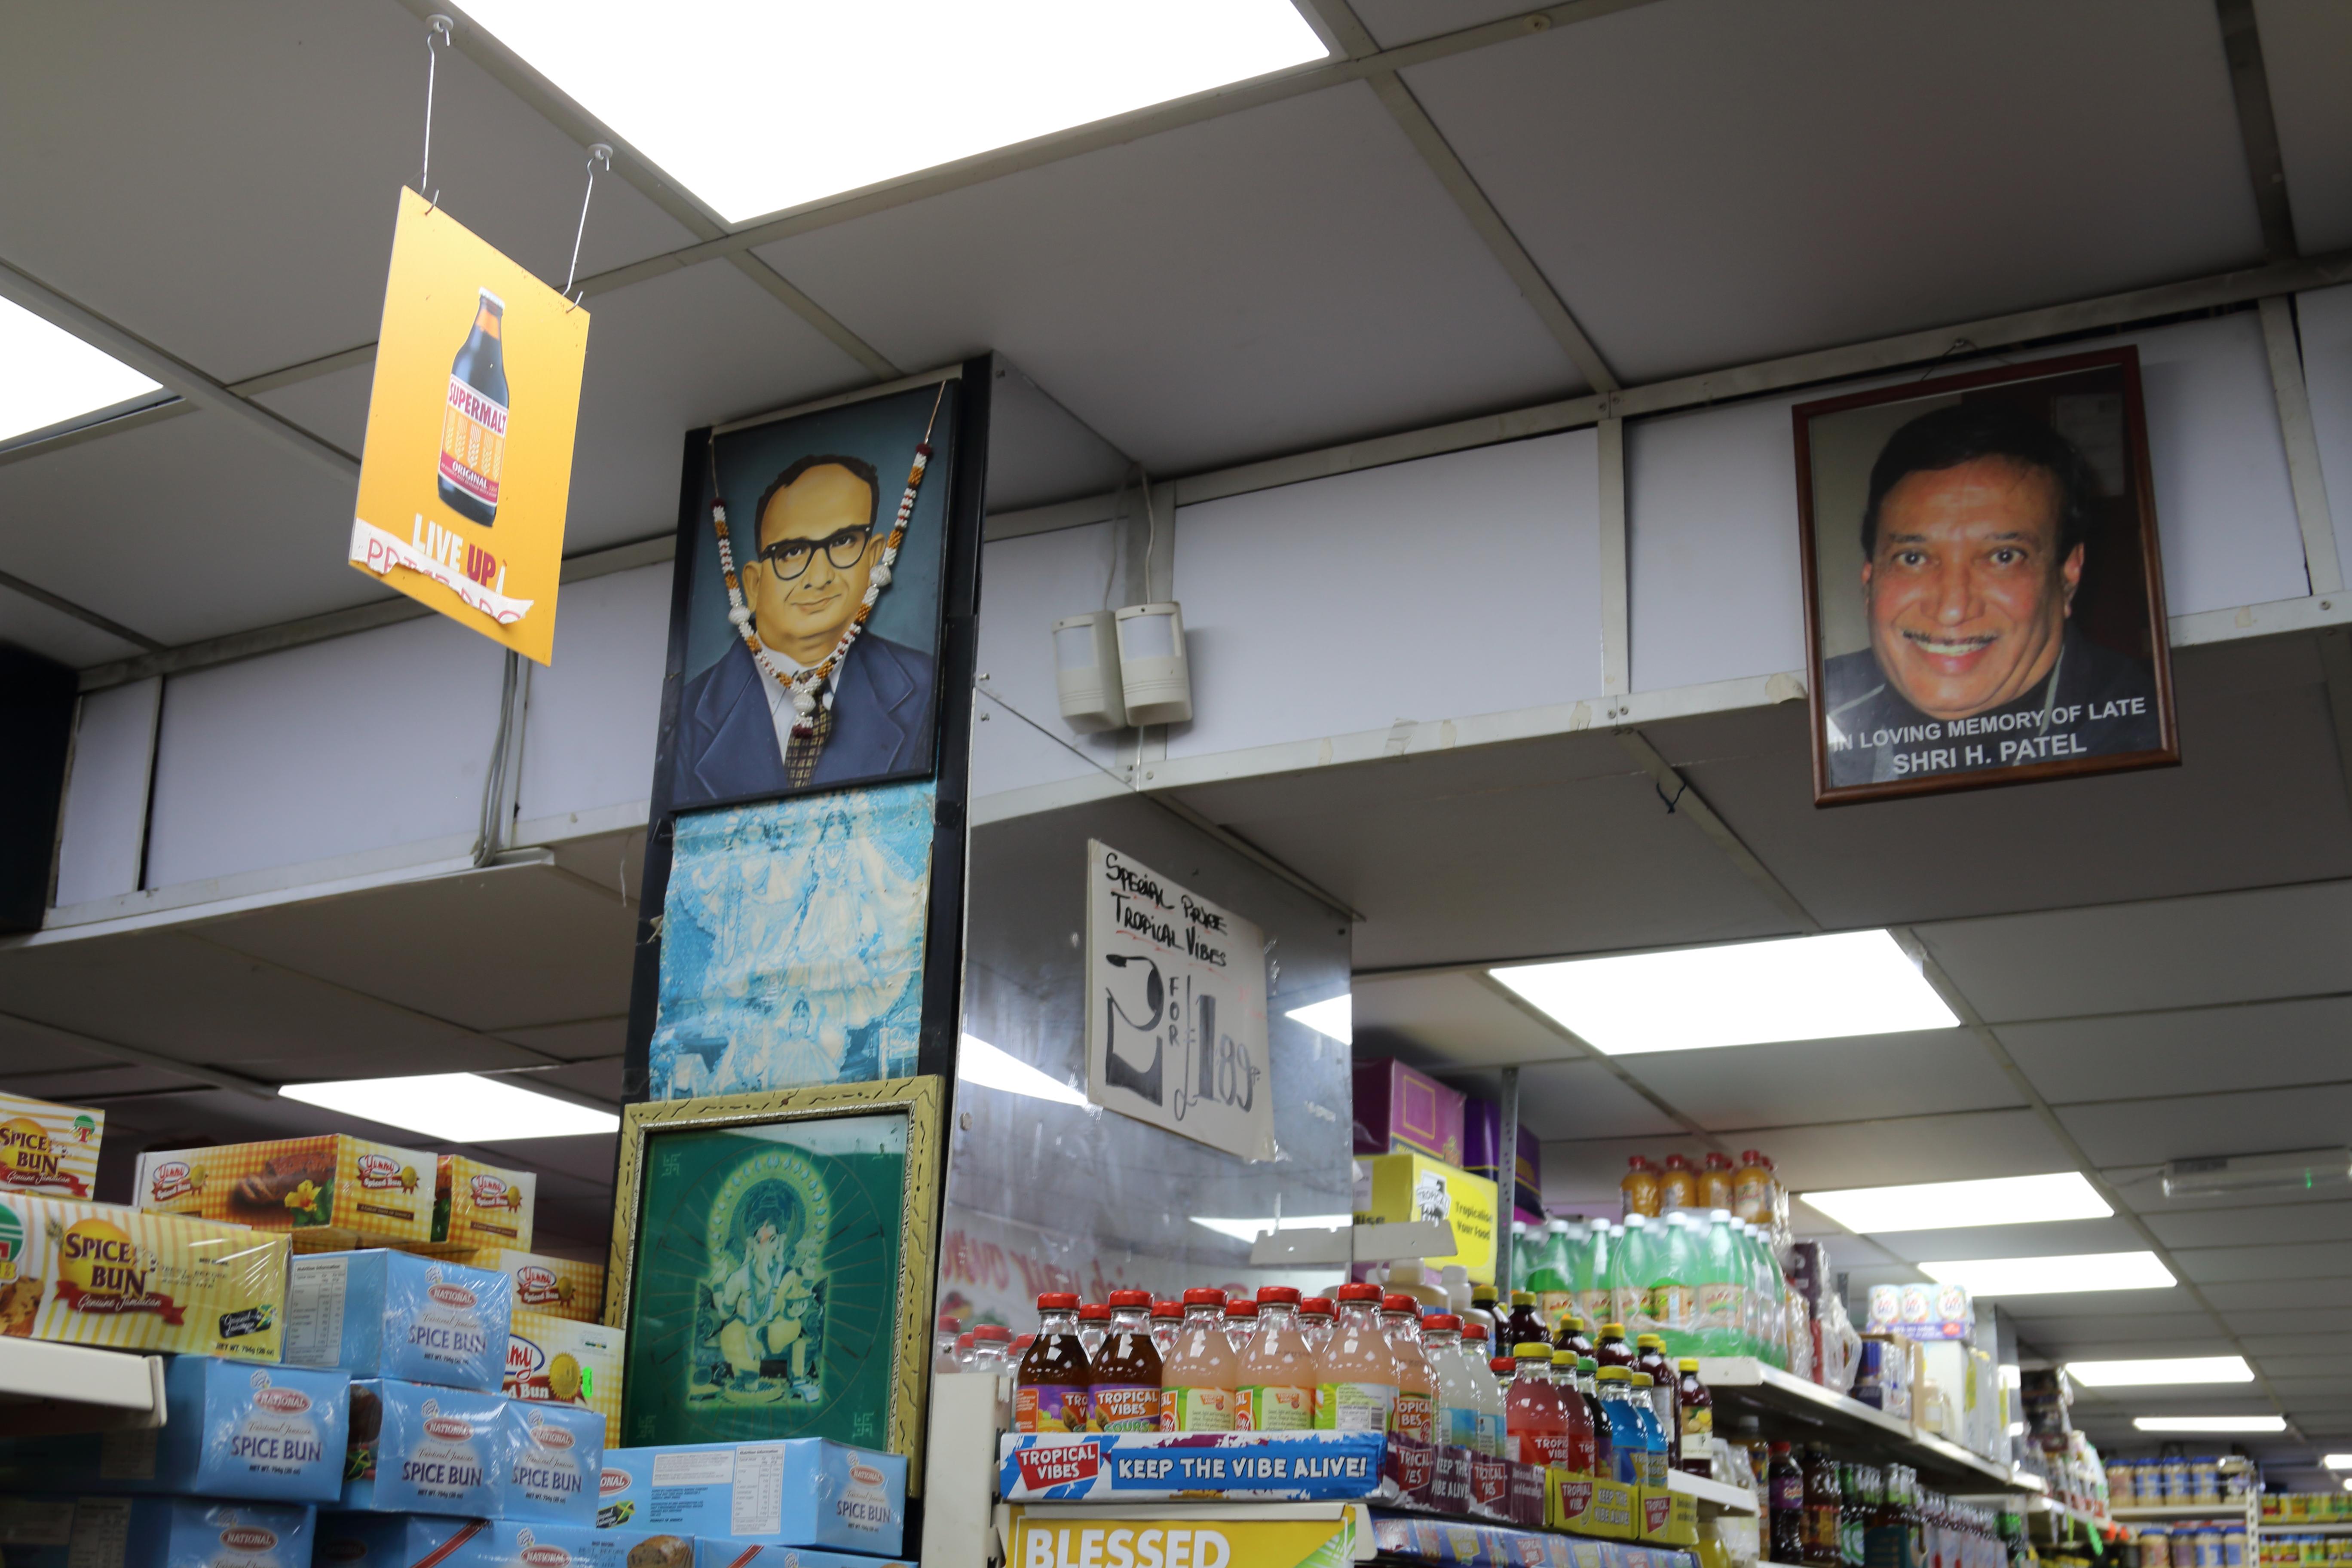 Inside Blue Mountain Peak grocery store, showing photographs of Harshad Patel, the founder of the shop.